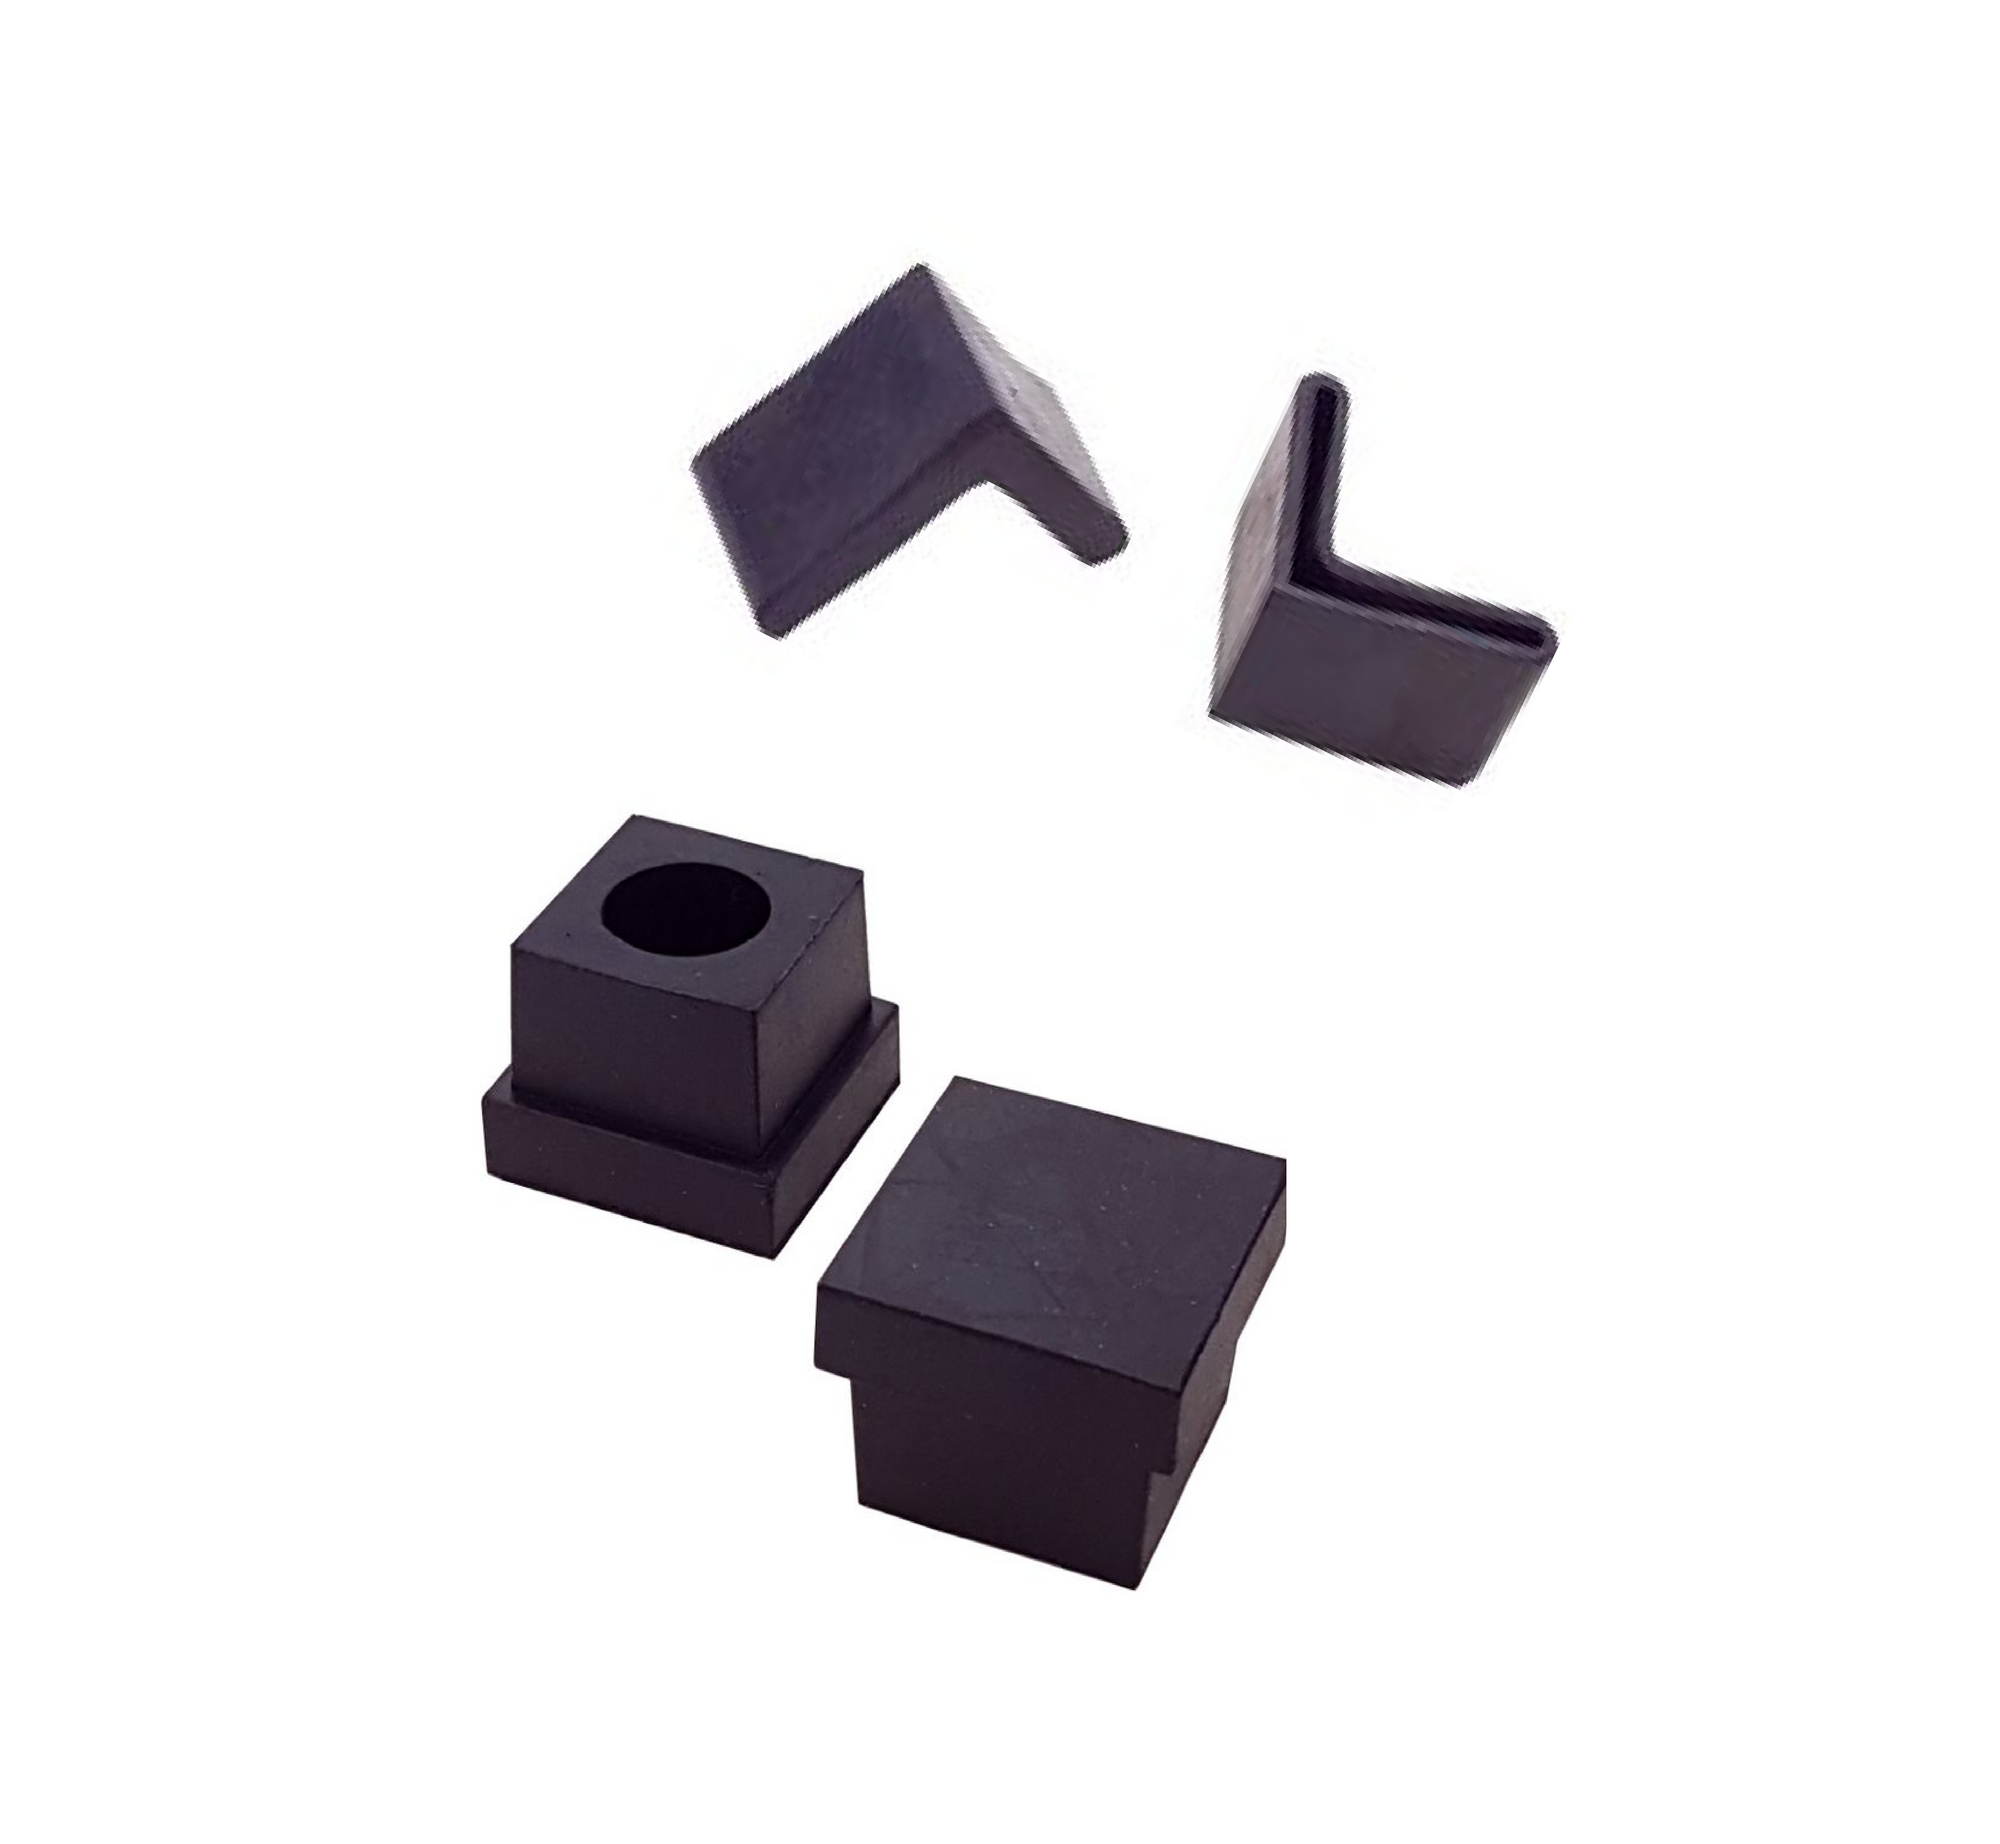 Replacement Rubber Feet for Step Stools